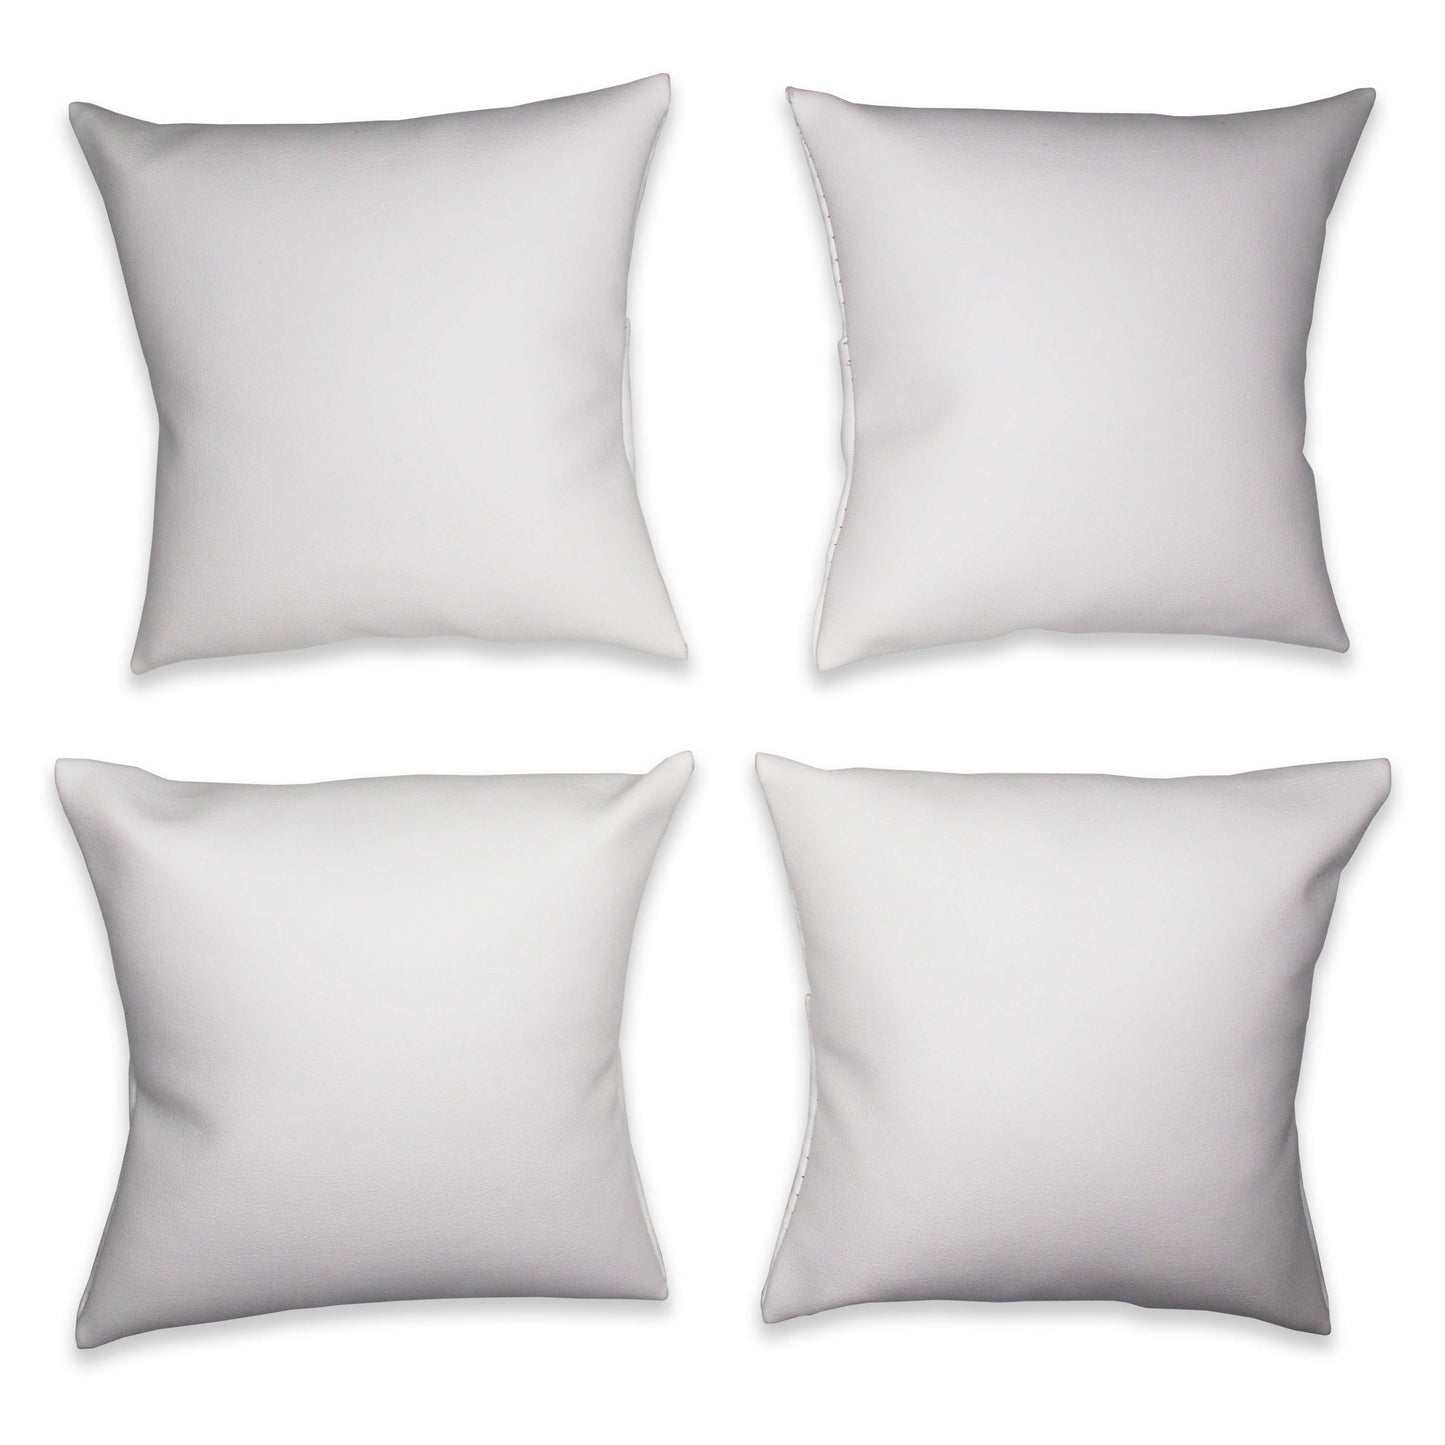 4" White Leatherette Pillow Displays